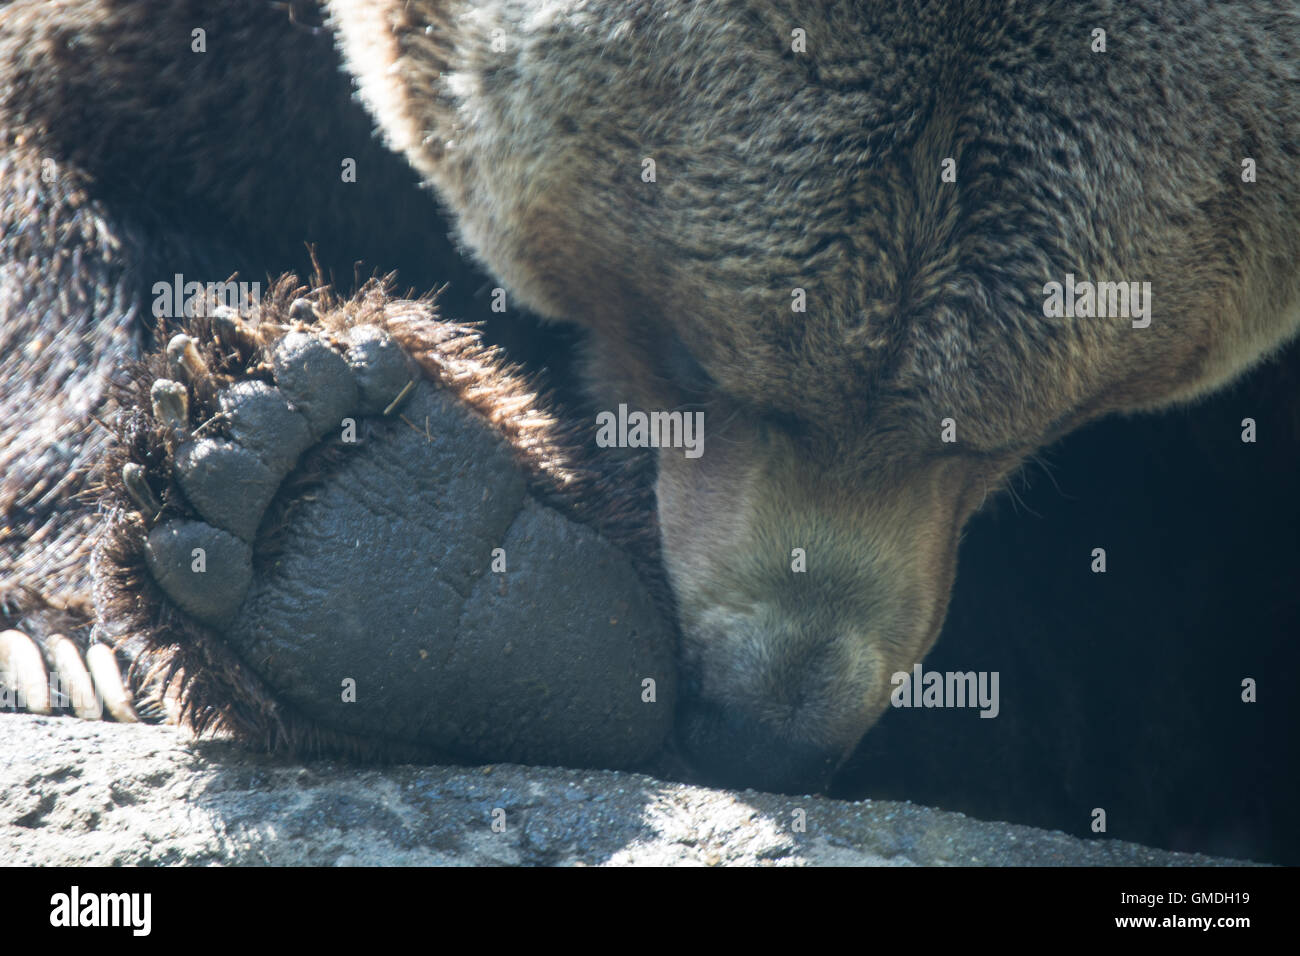 A grizzly bear sits down to examine his feet Stock Photo